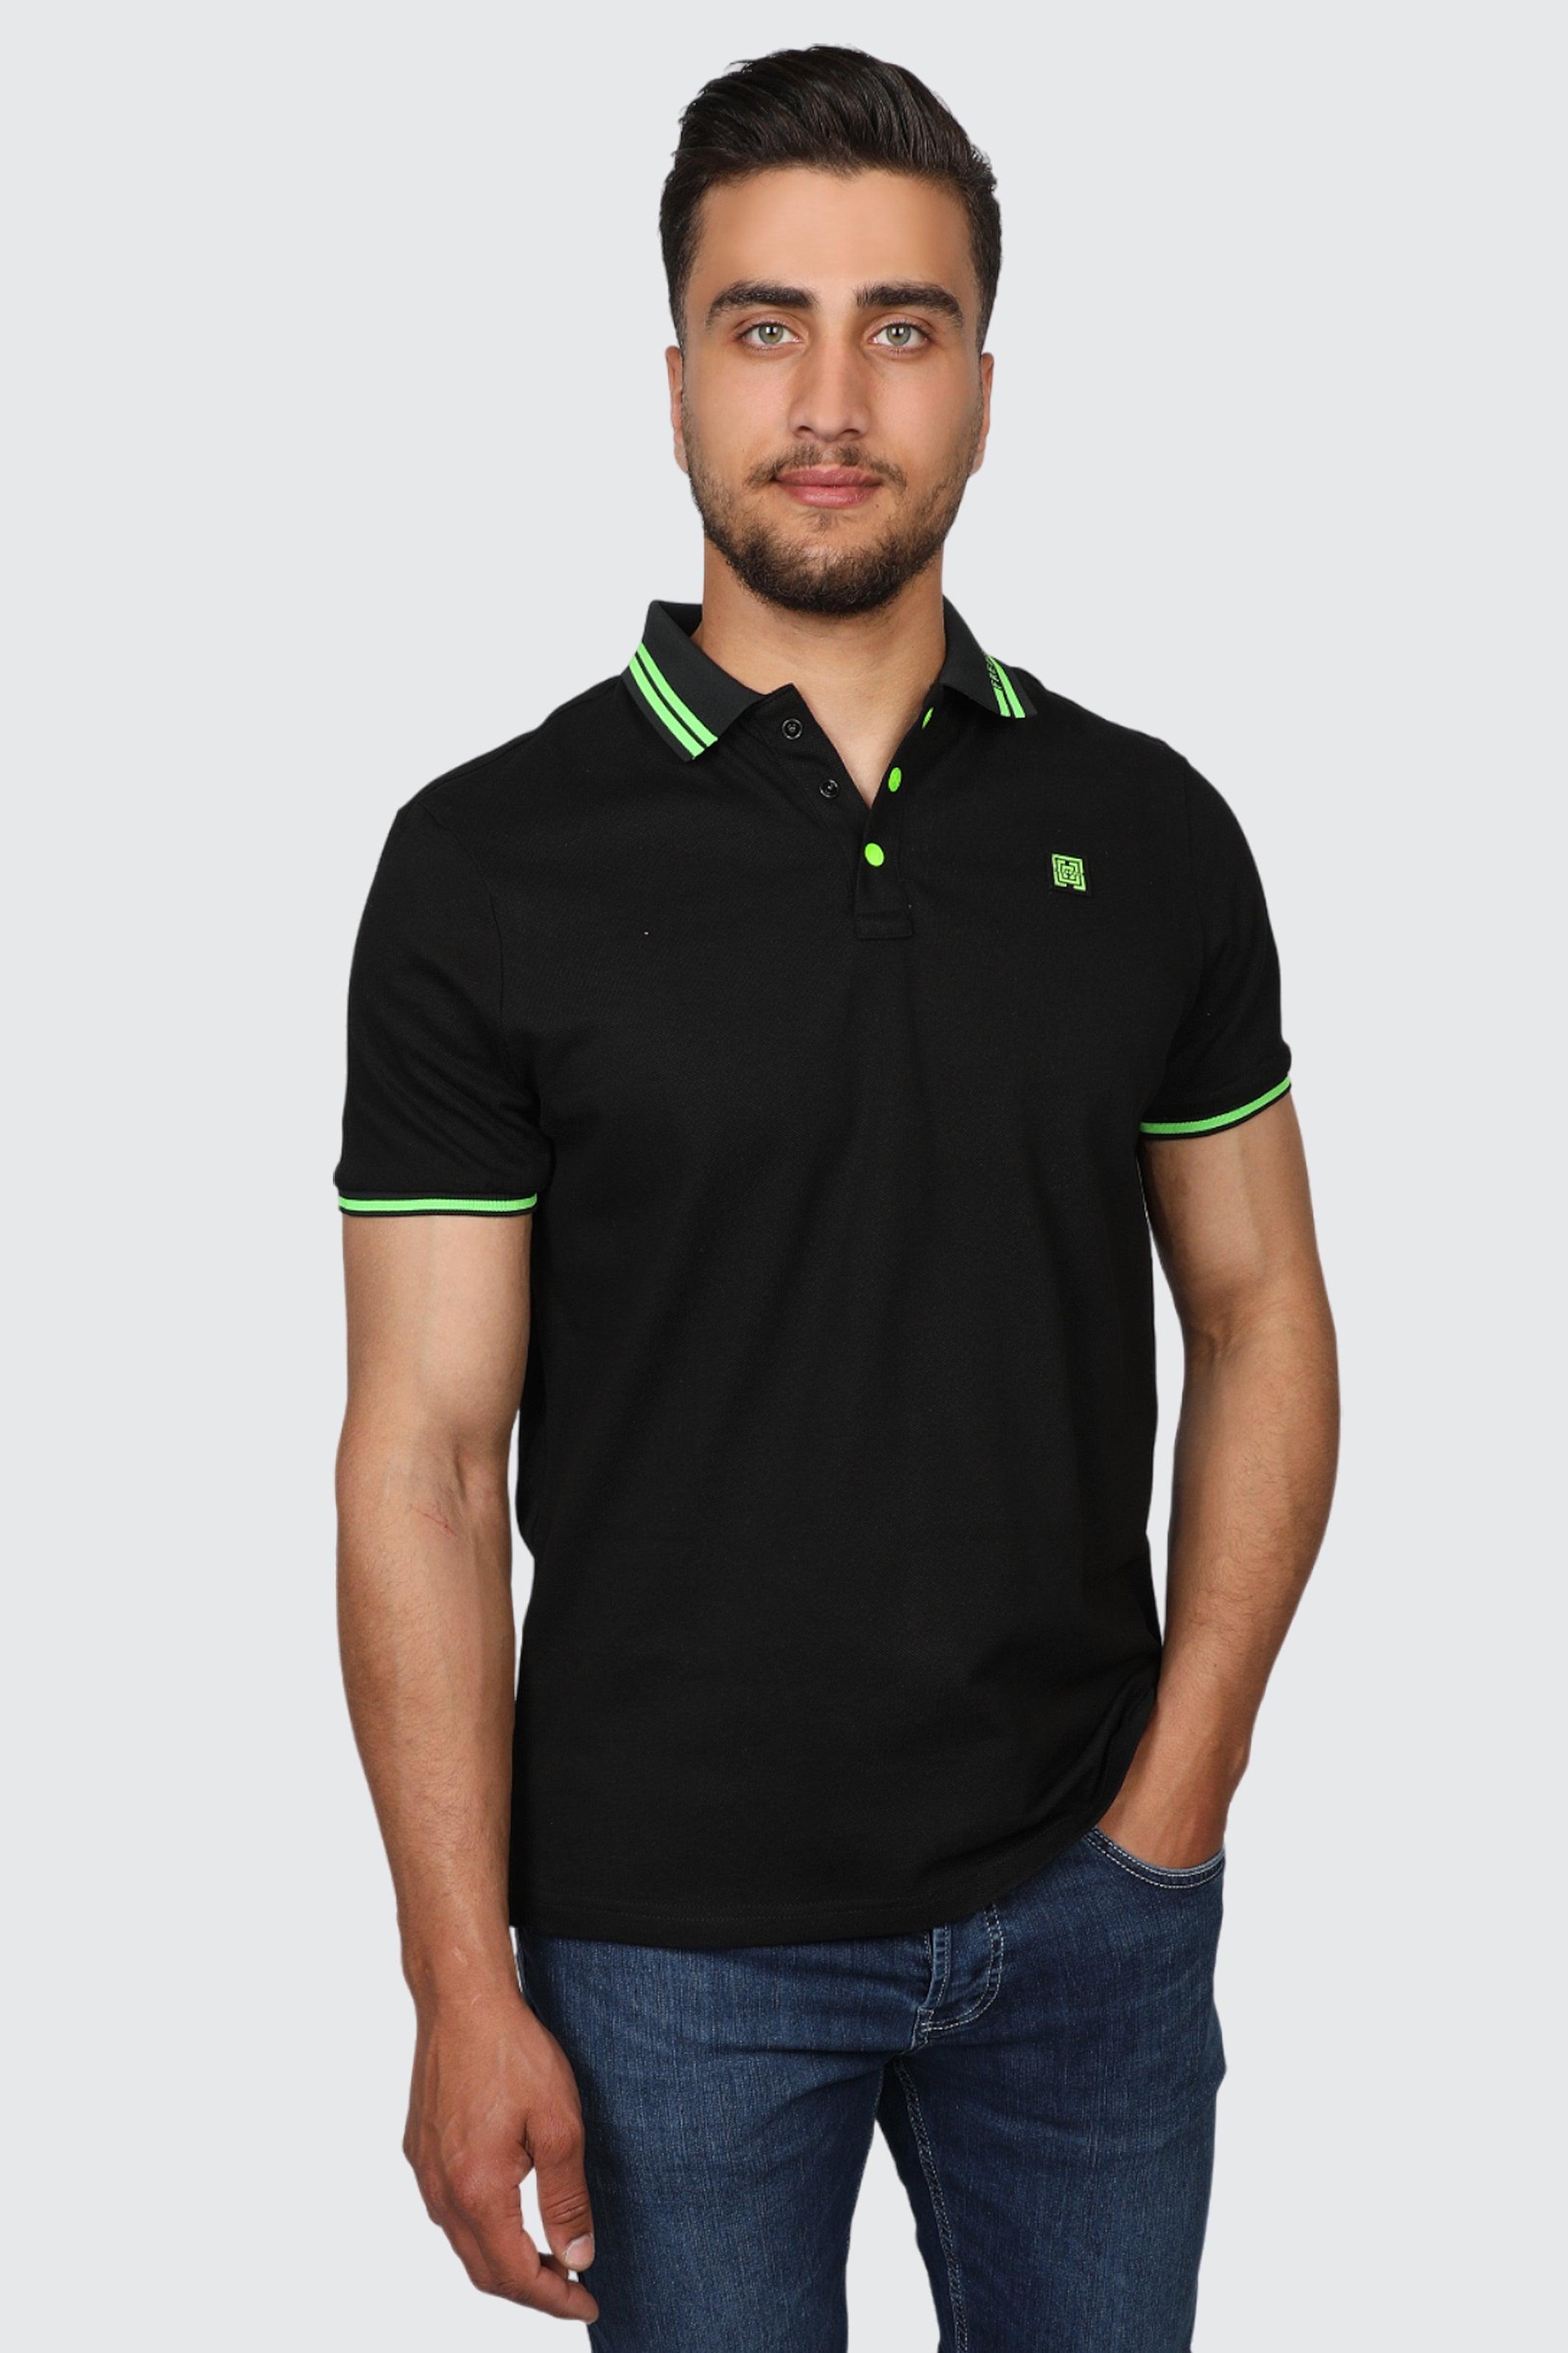 Black Polo With"Free Soul"Collar Design